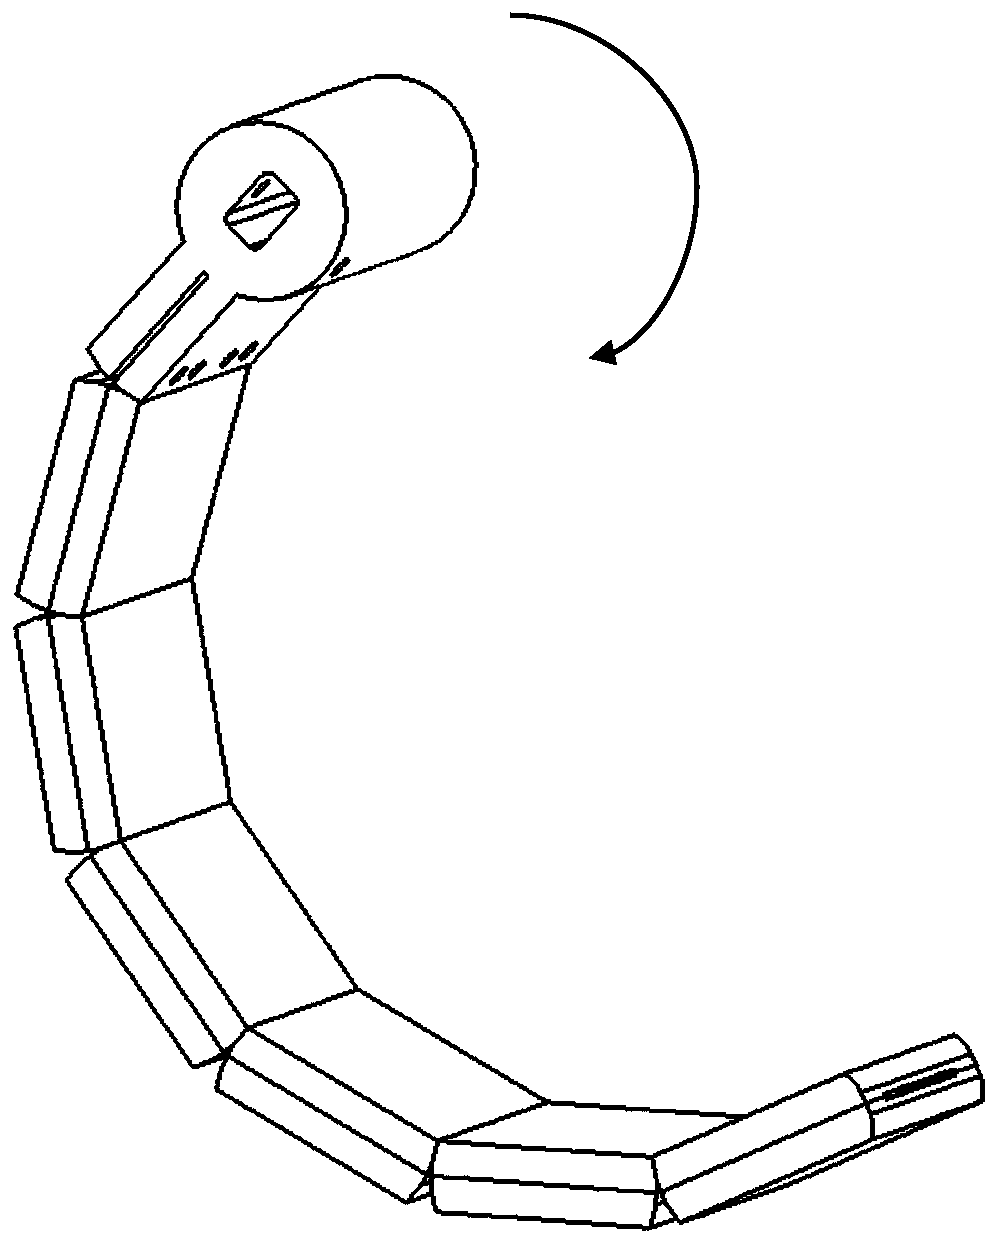 A two-way limited flexible fin-leg propulsion device